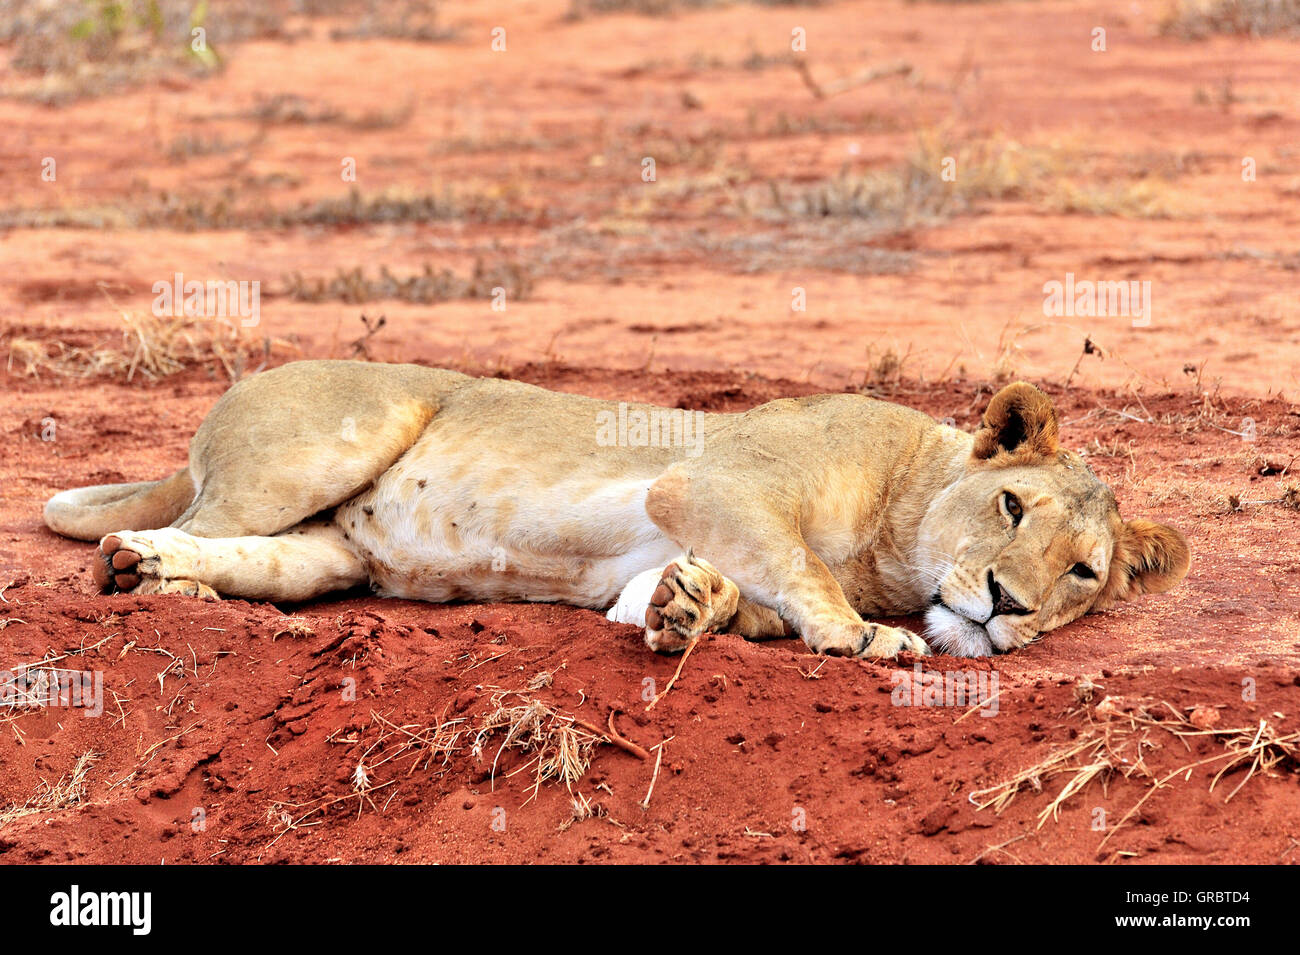 Lion Laying Down On Earth Stock Photo